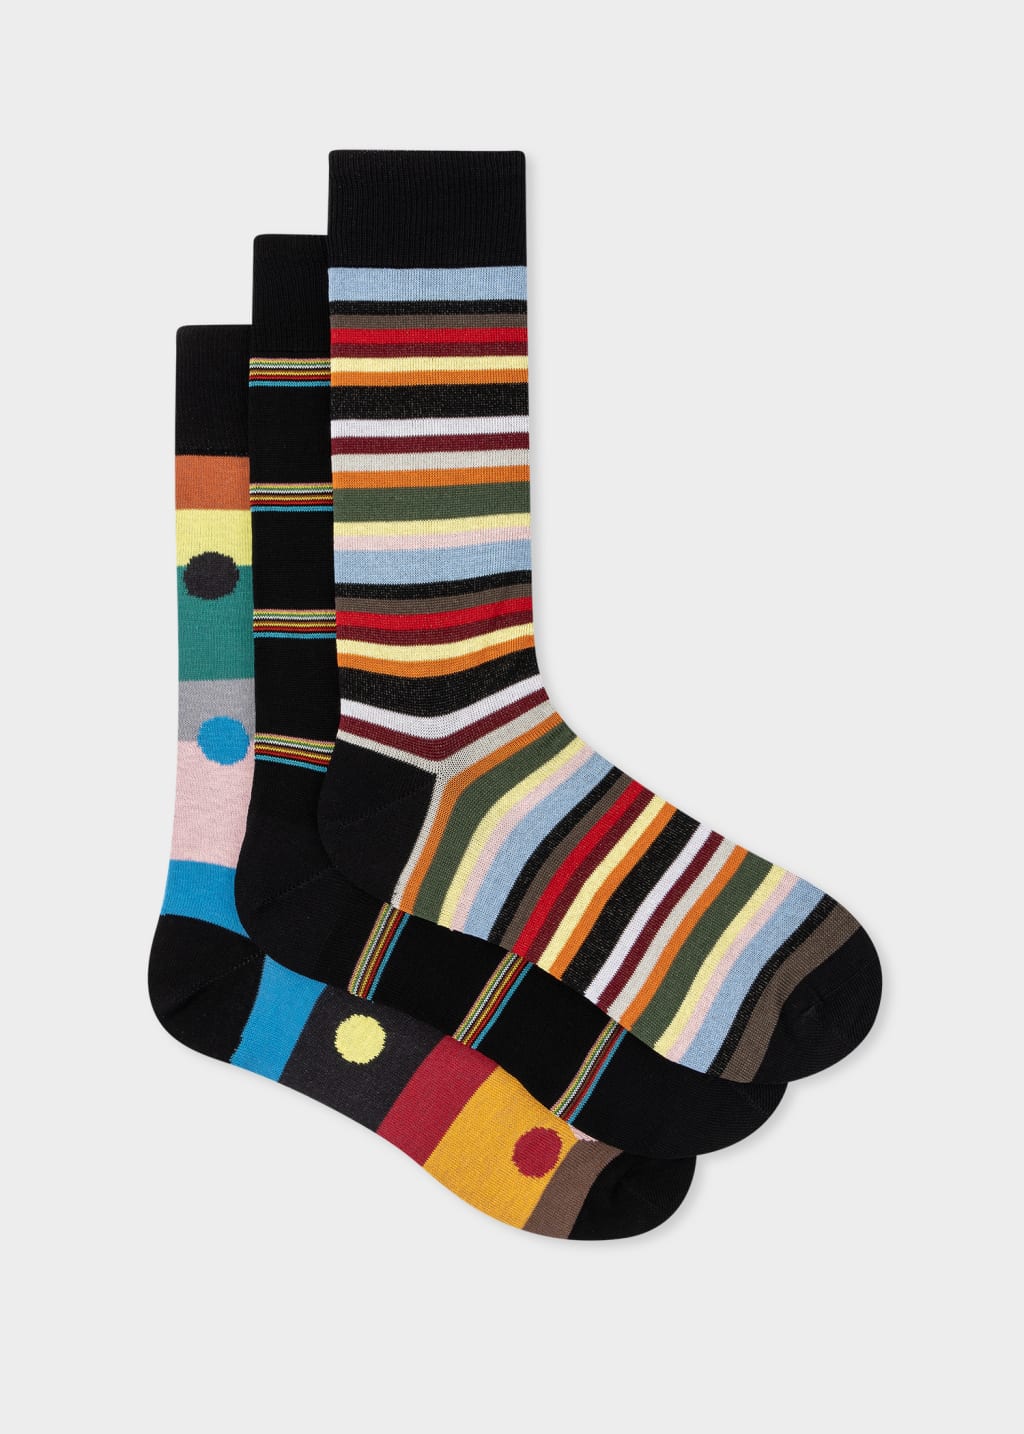 Front View - Stripe And Spot Socks Three Pack Paul Smith